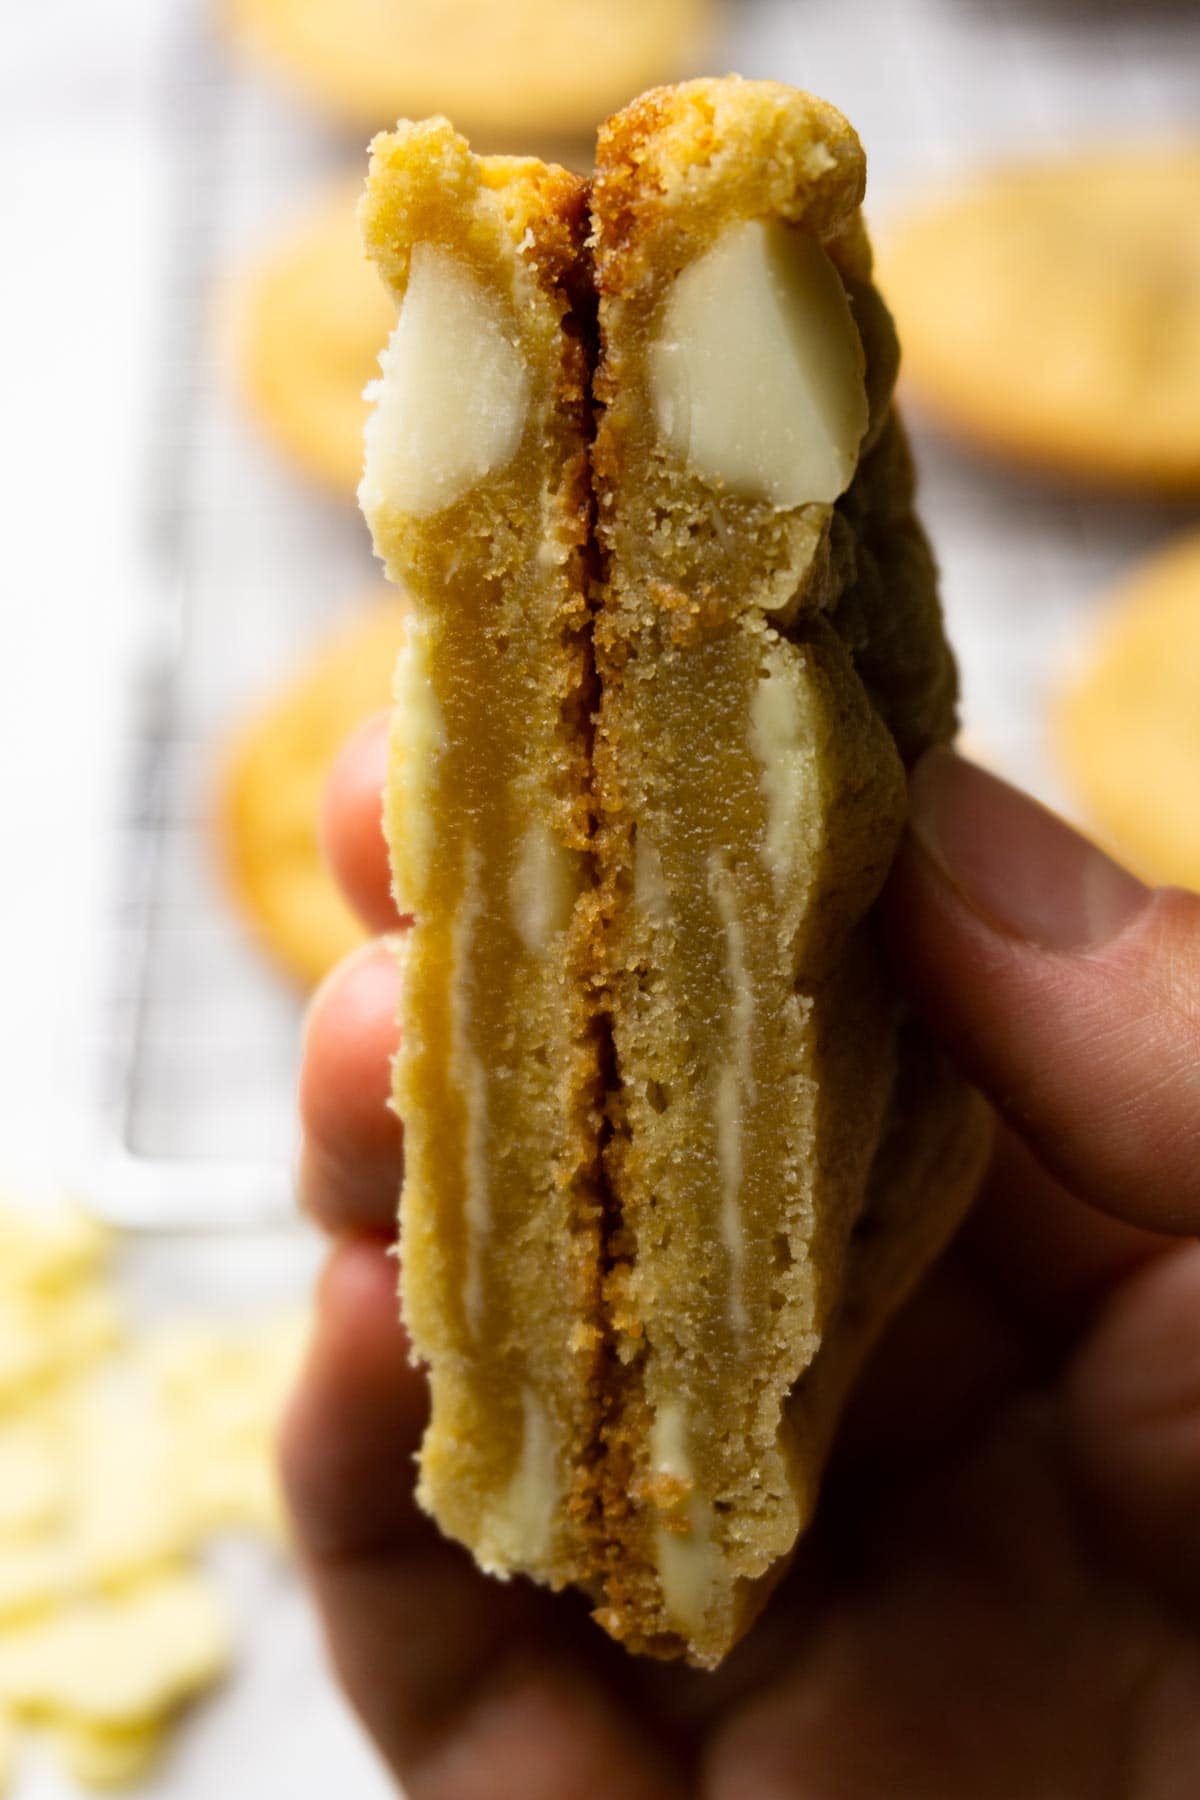 A hand is holding a cut in half cookie with white chocolate and macadamia nuts.